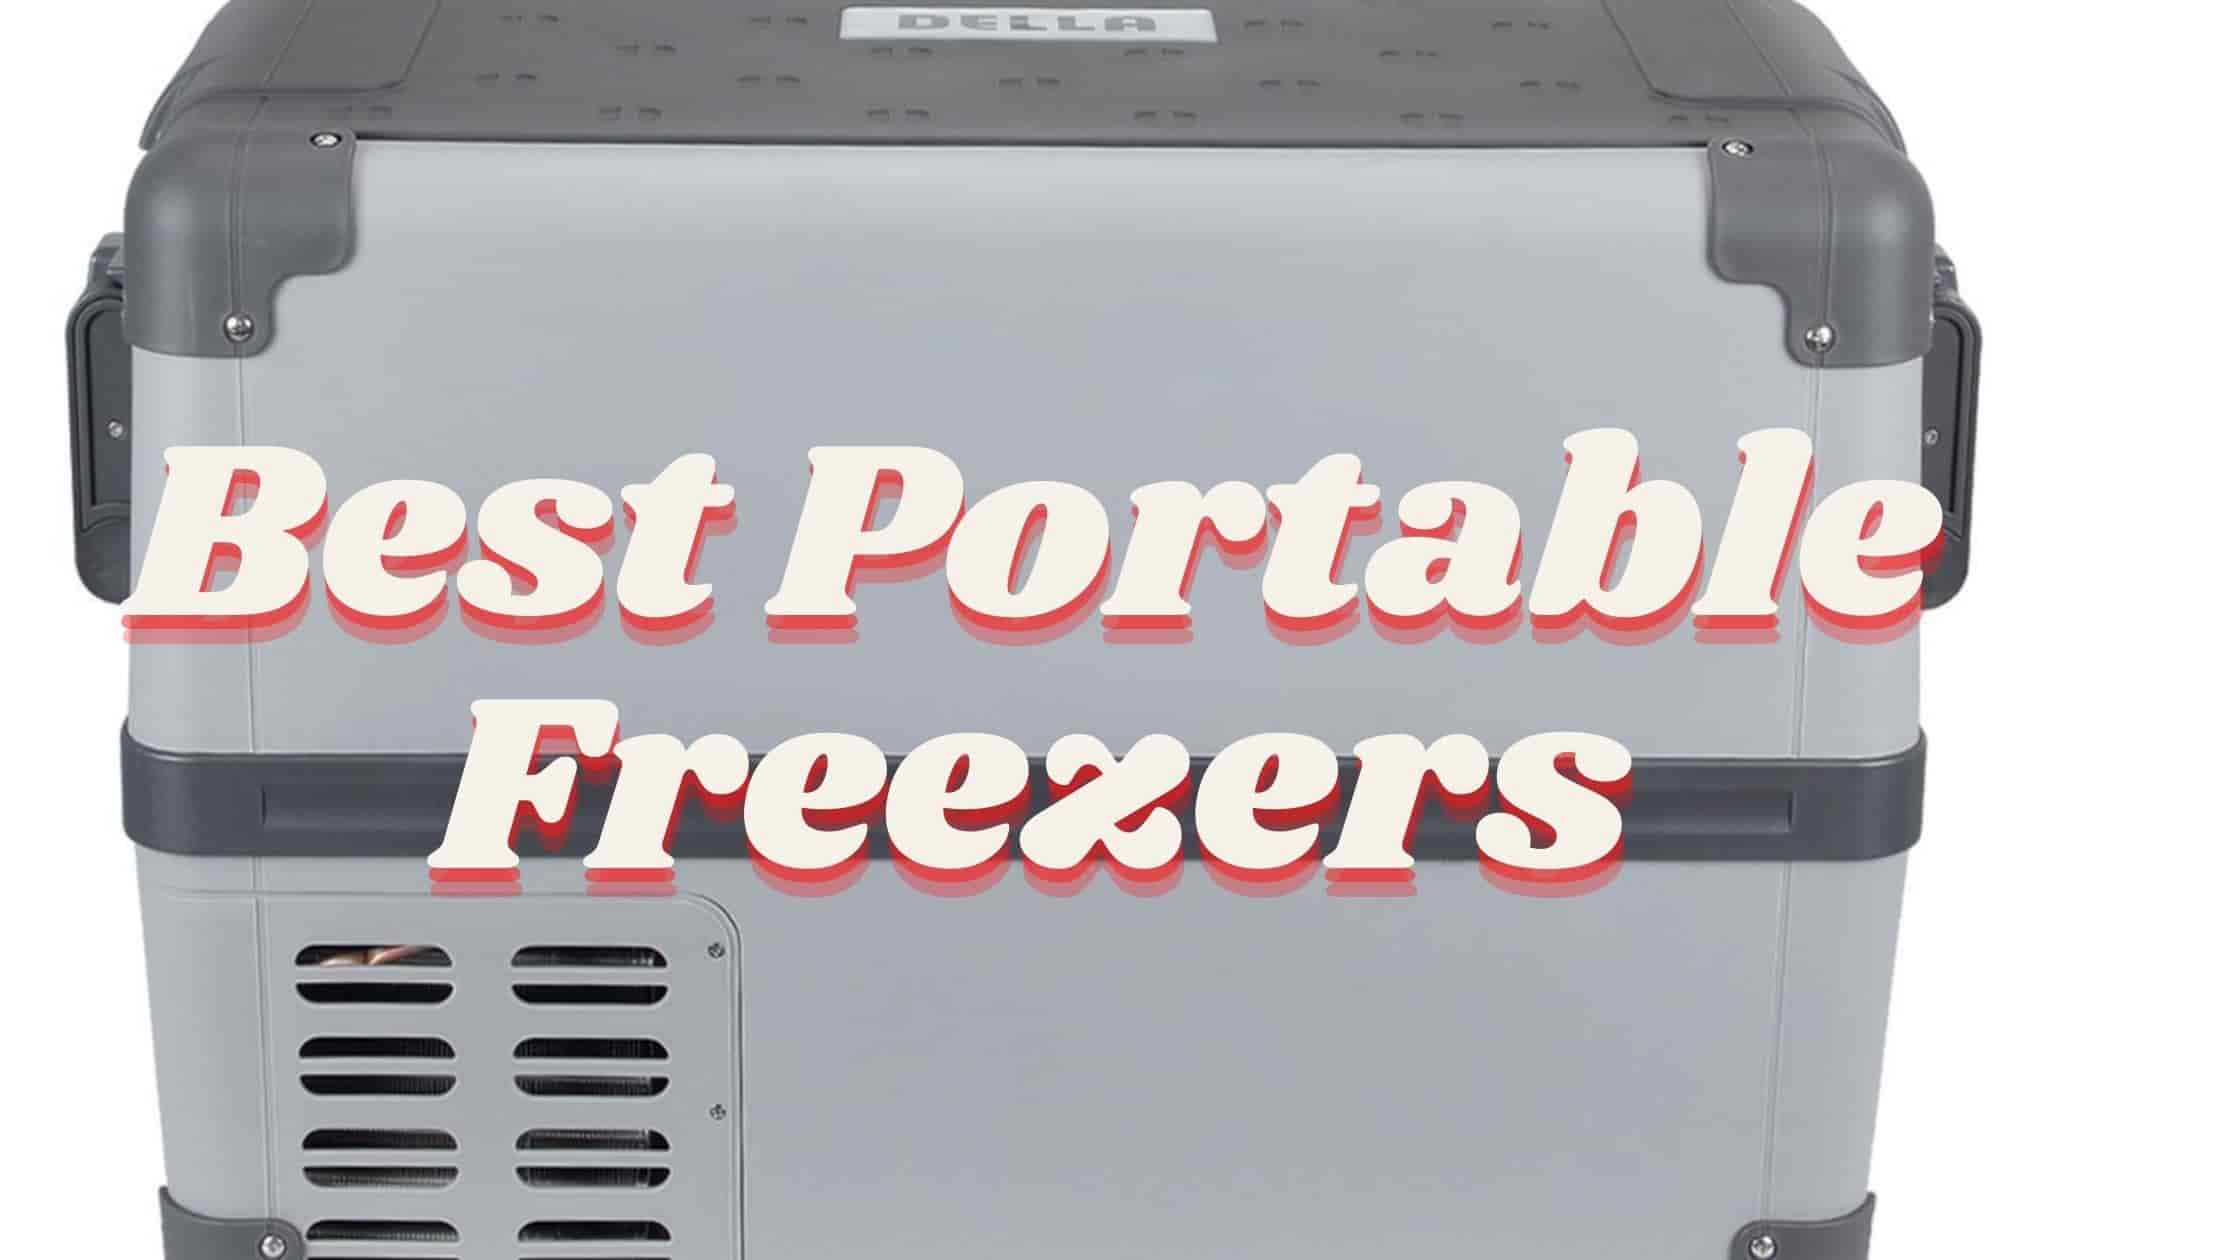 the Best Portable freezers